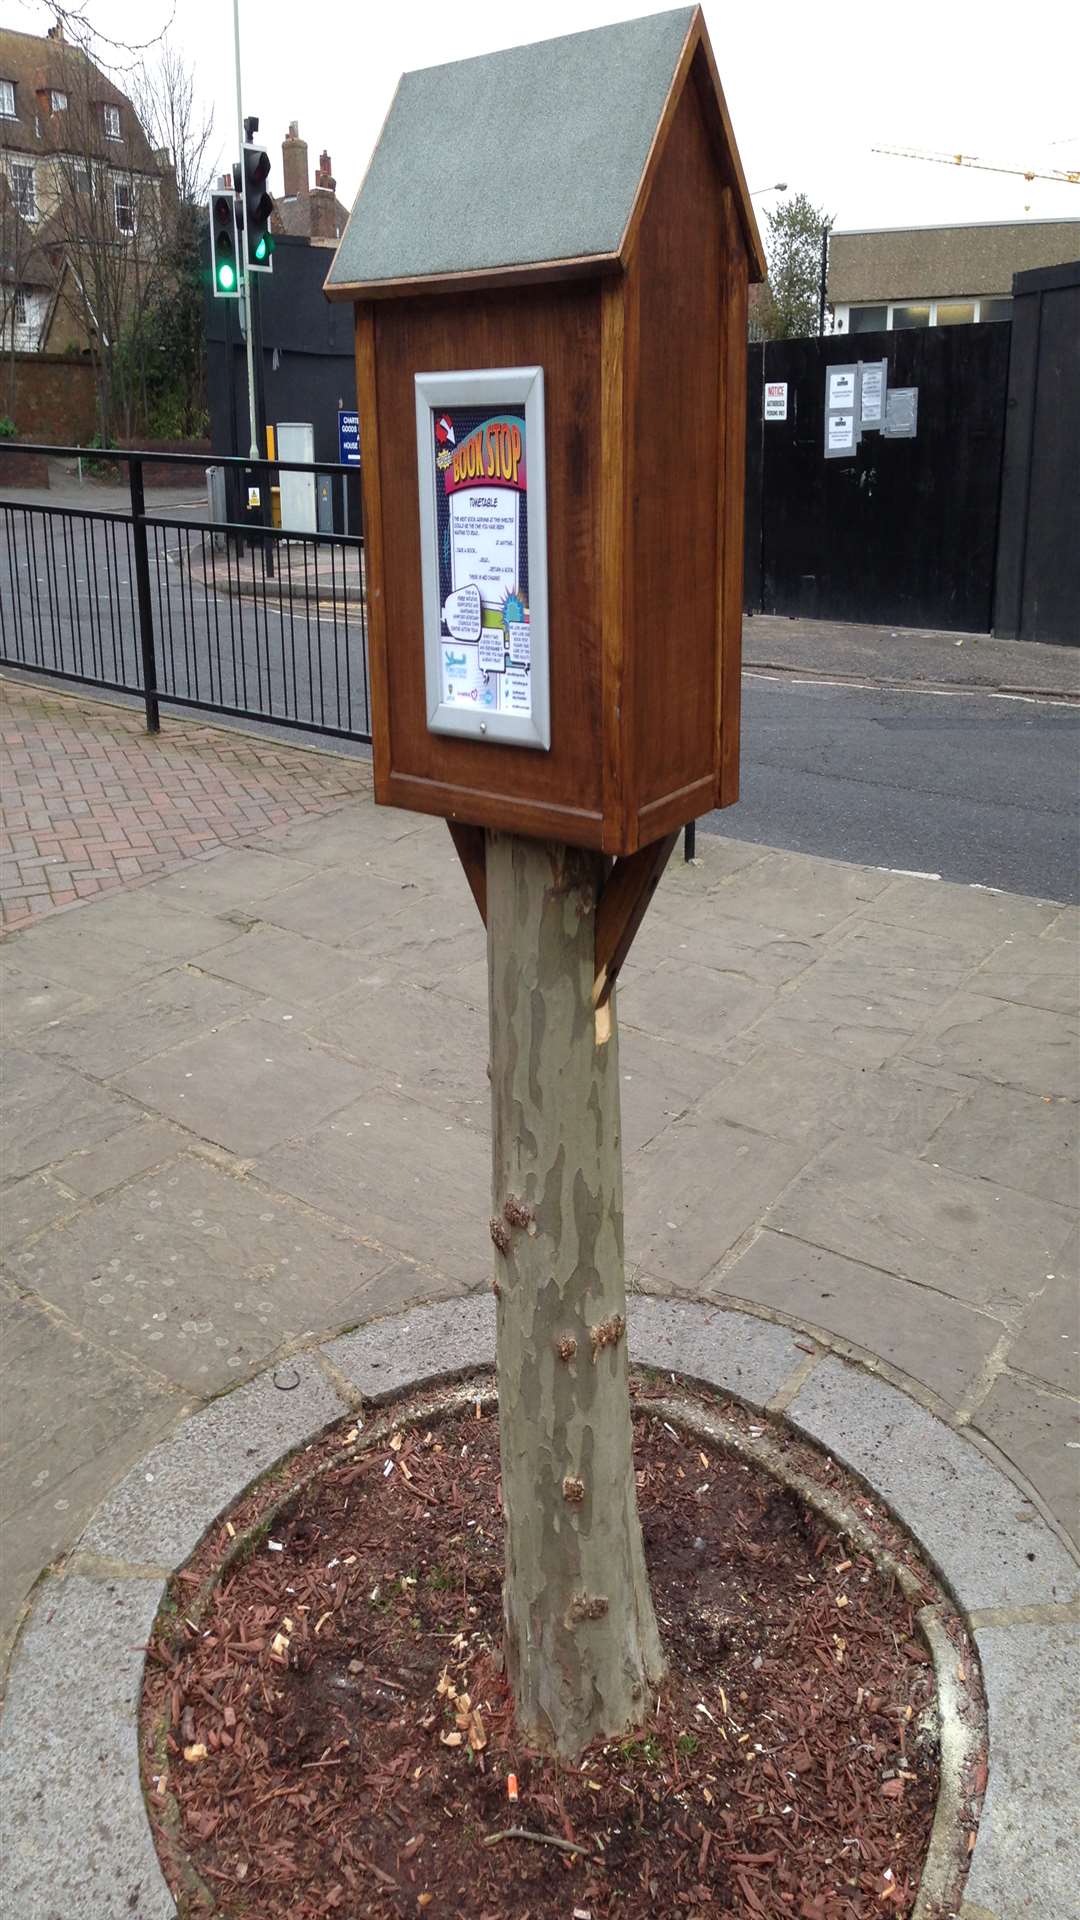 The box can be found in Park Street